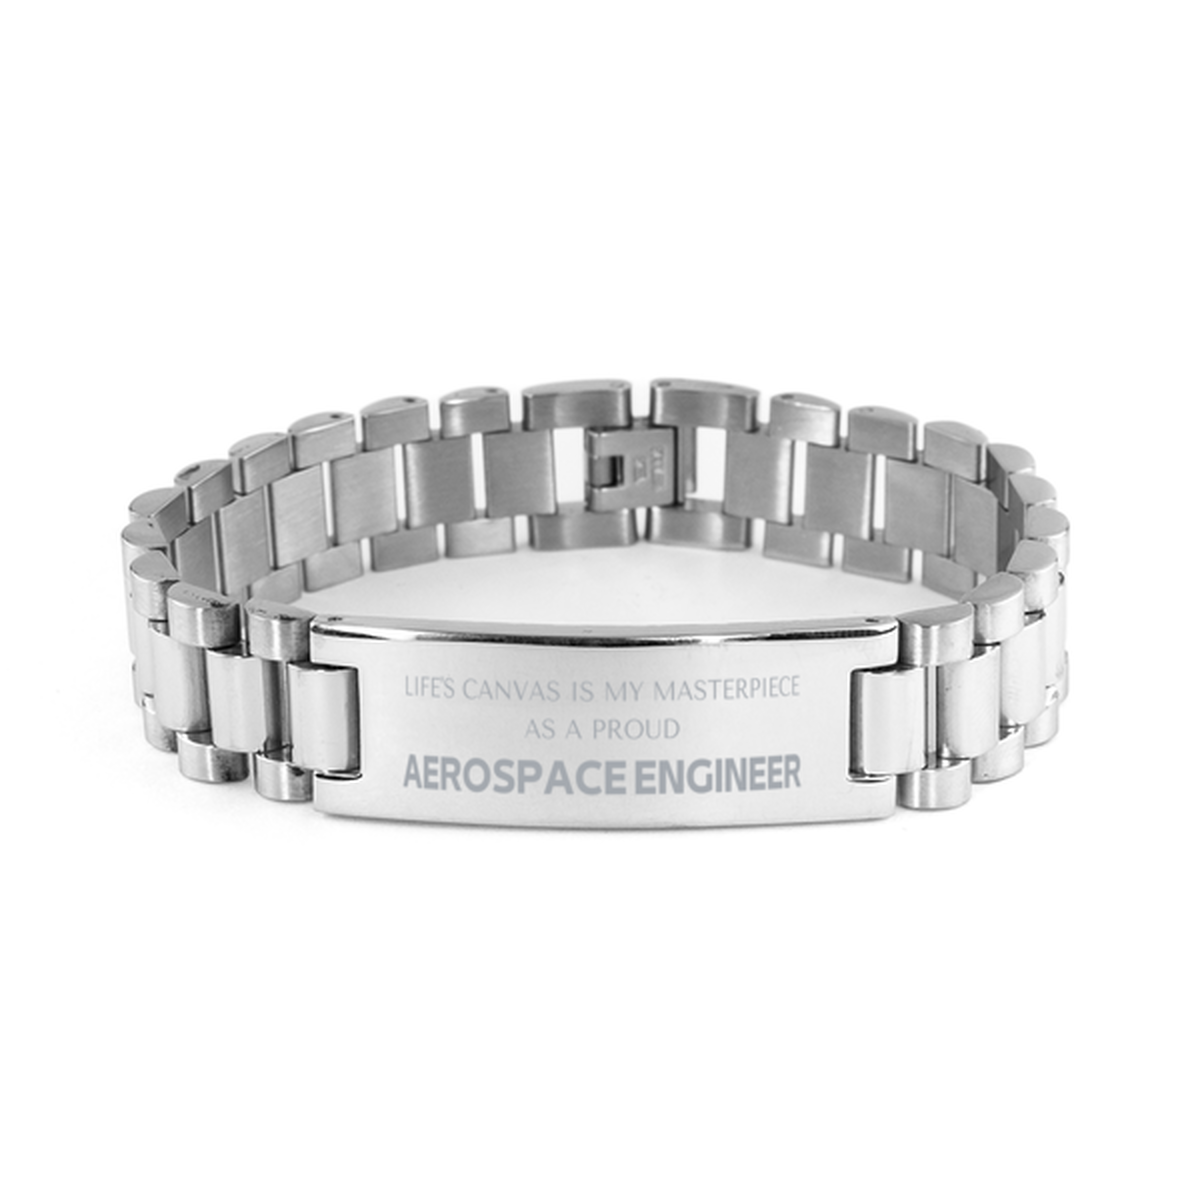 Proud Aerospace Engineer Gifts, Life's canvas is my masterpiece, Epic Birthday Christmas Unique Ladder Stainless Steel Bracelet For Aerospace Engineer, Coworkers, Men, Women, Friends